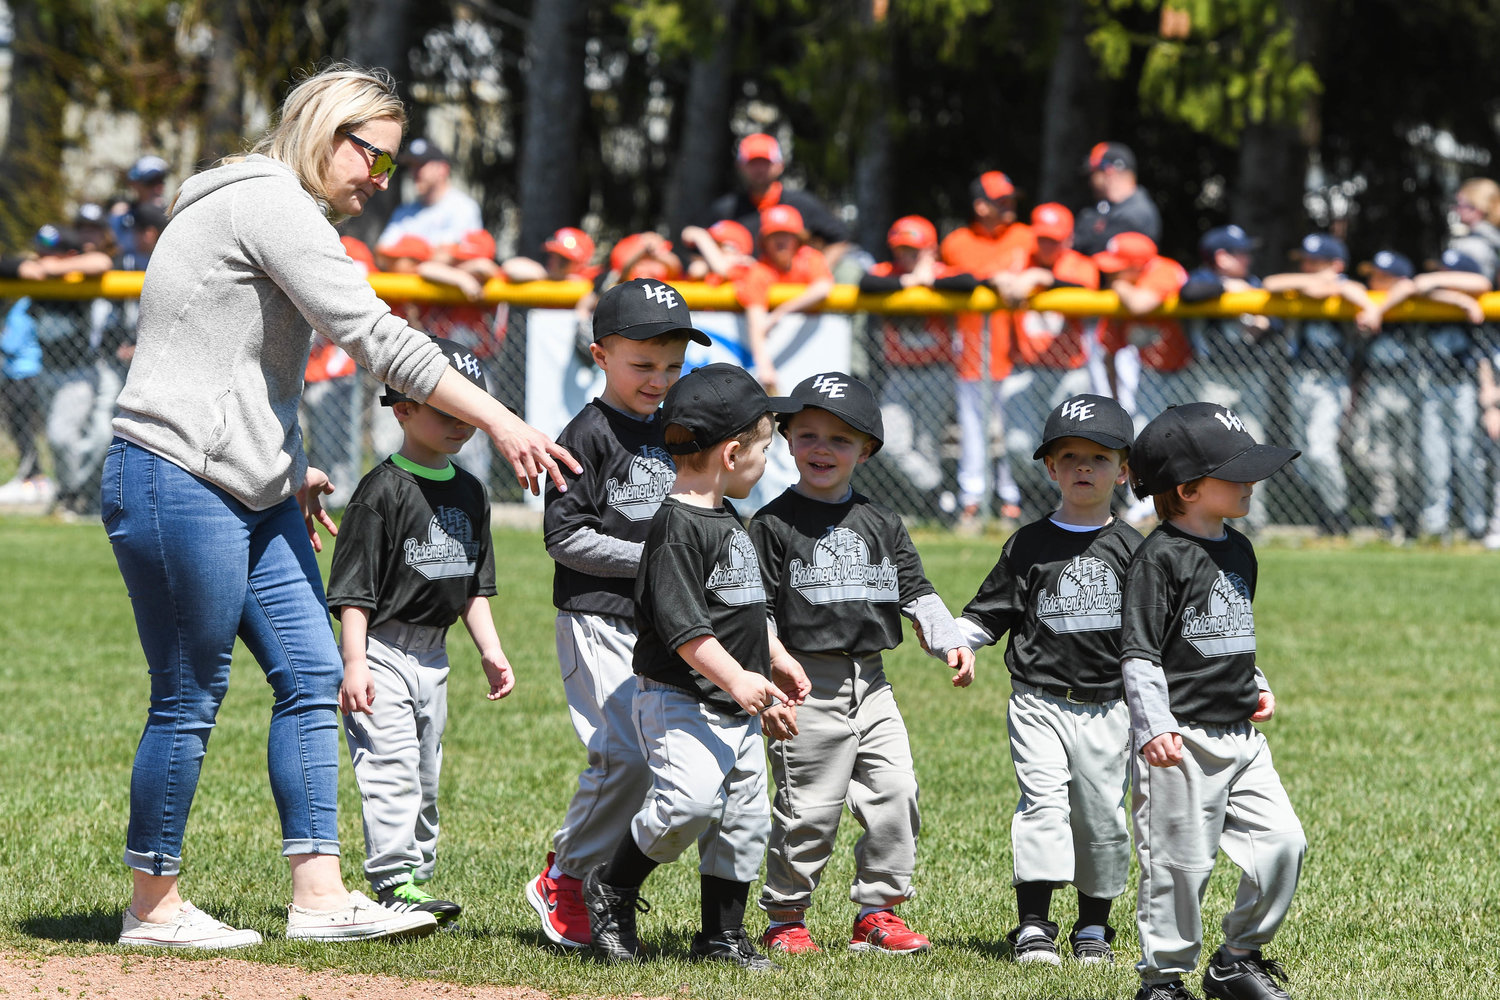 Young players from the Basement Waterproofing team are announced to the field as the Town of Lee Little League program hosts their opening day ceremony on Saturday at Lee Town Park.